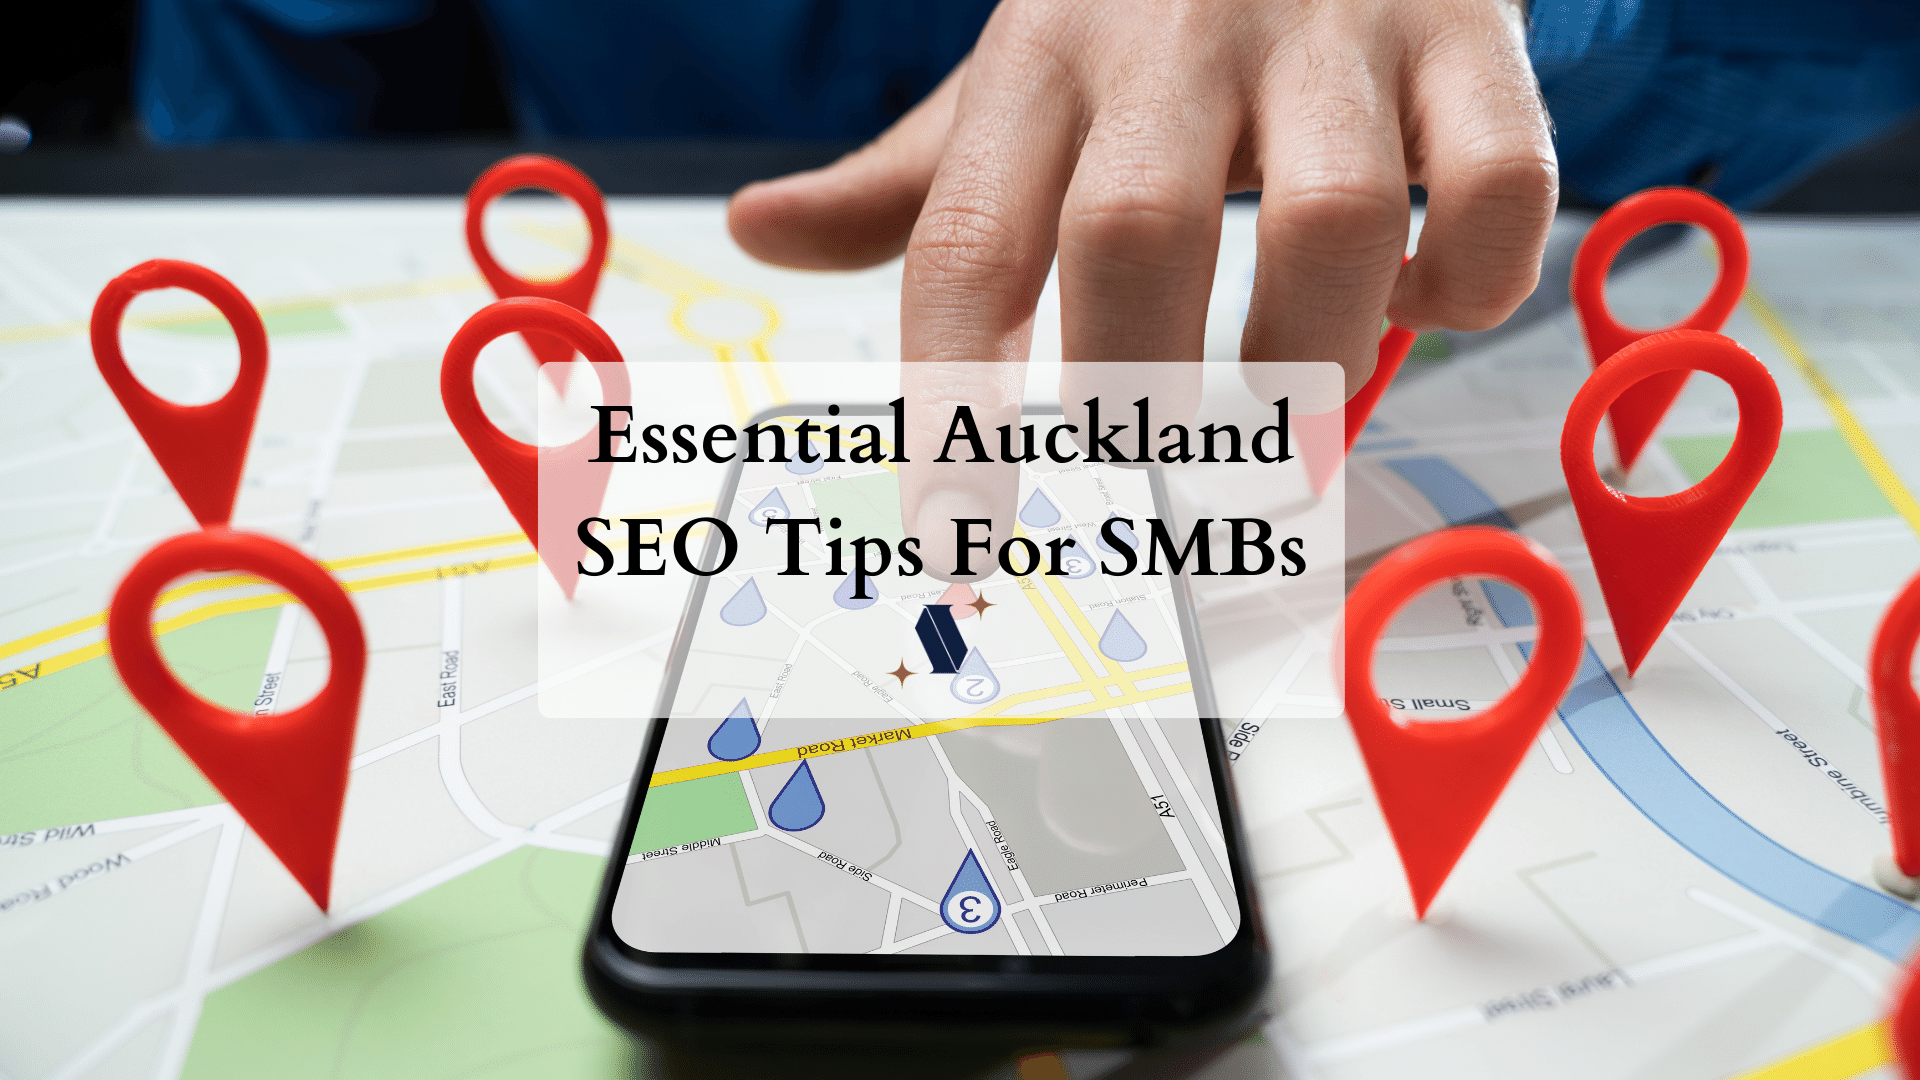 Essential Auckland SEO Tips For SMBs